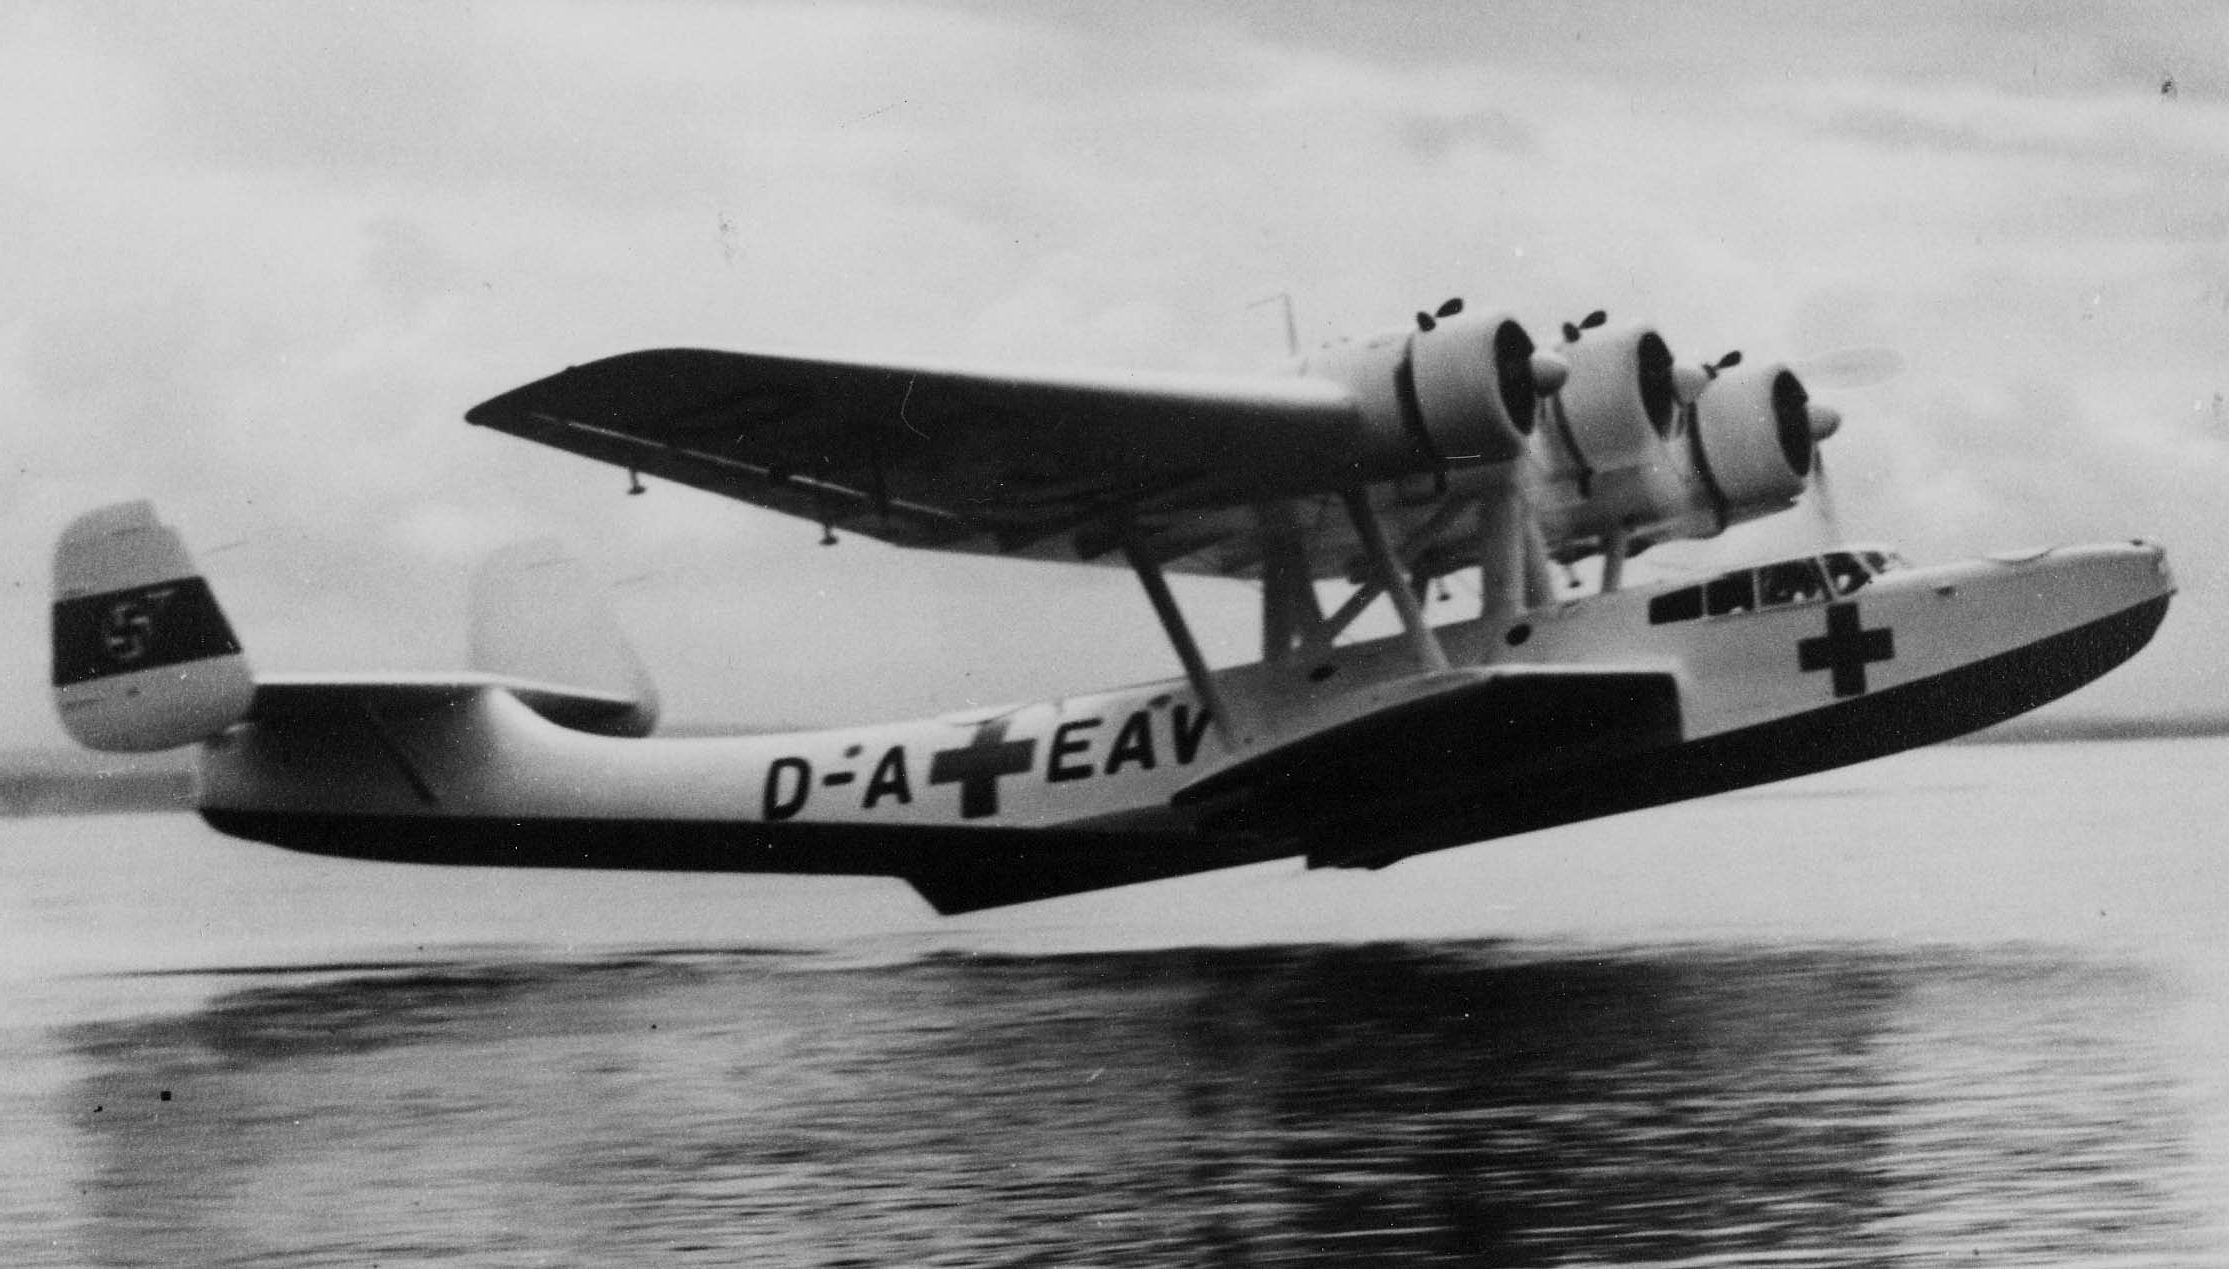 Do 24 float plane taking off, date unknown